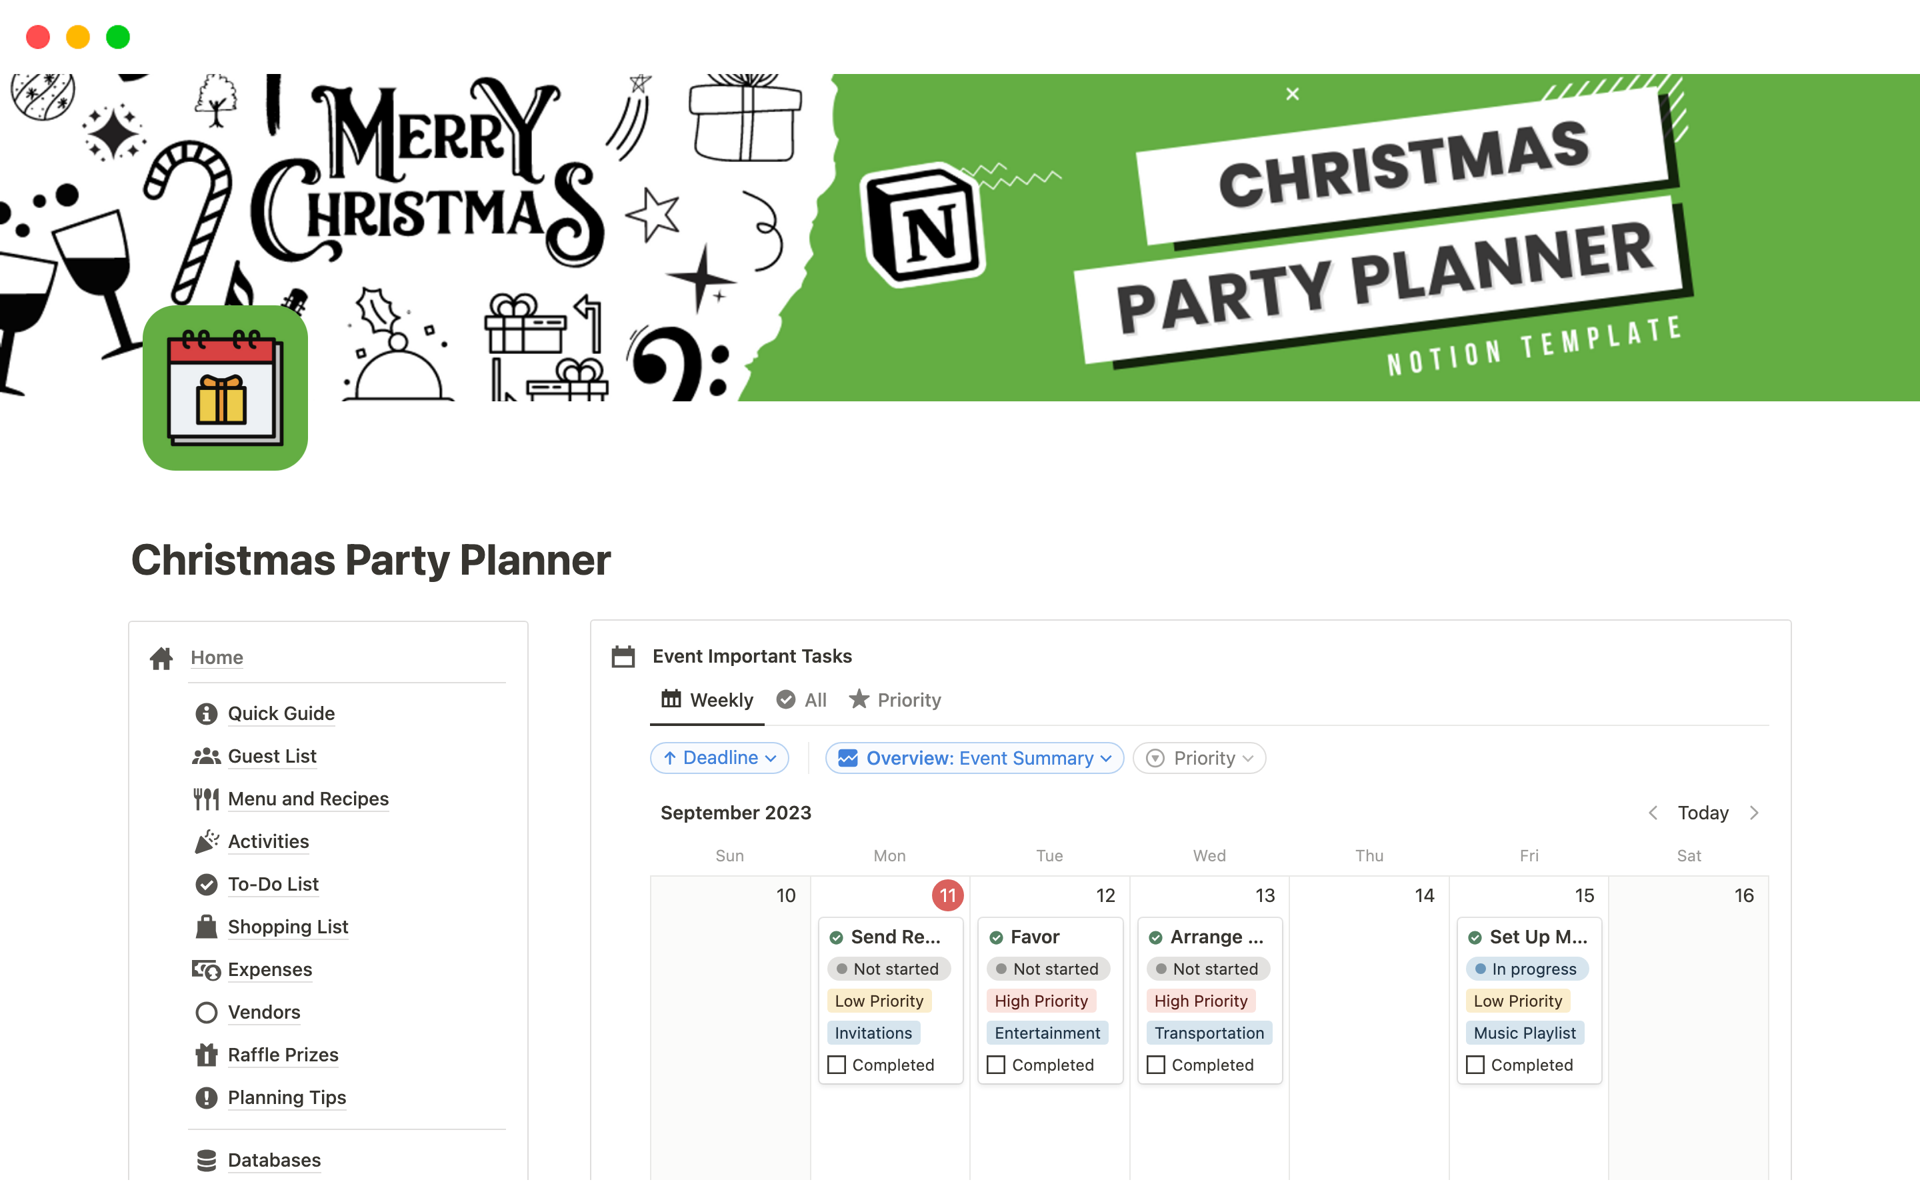 Effortlessly plan your Christmas party with this Notion template. Manage guest lists, budgets, menus, and more for a festive celebration.